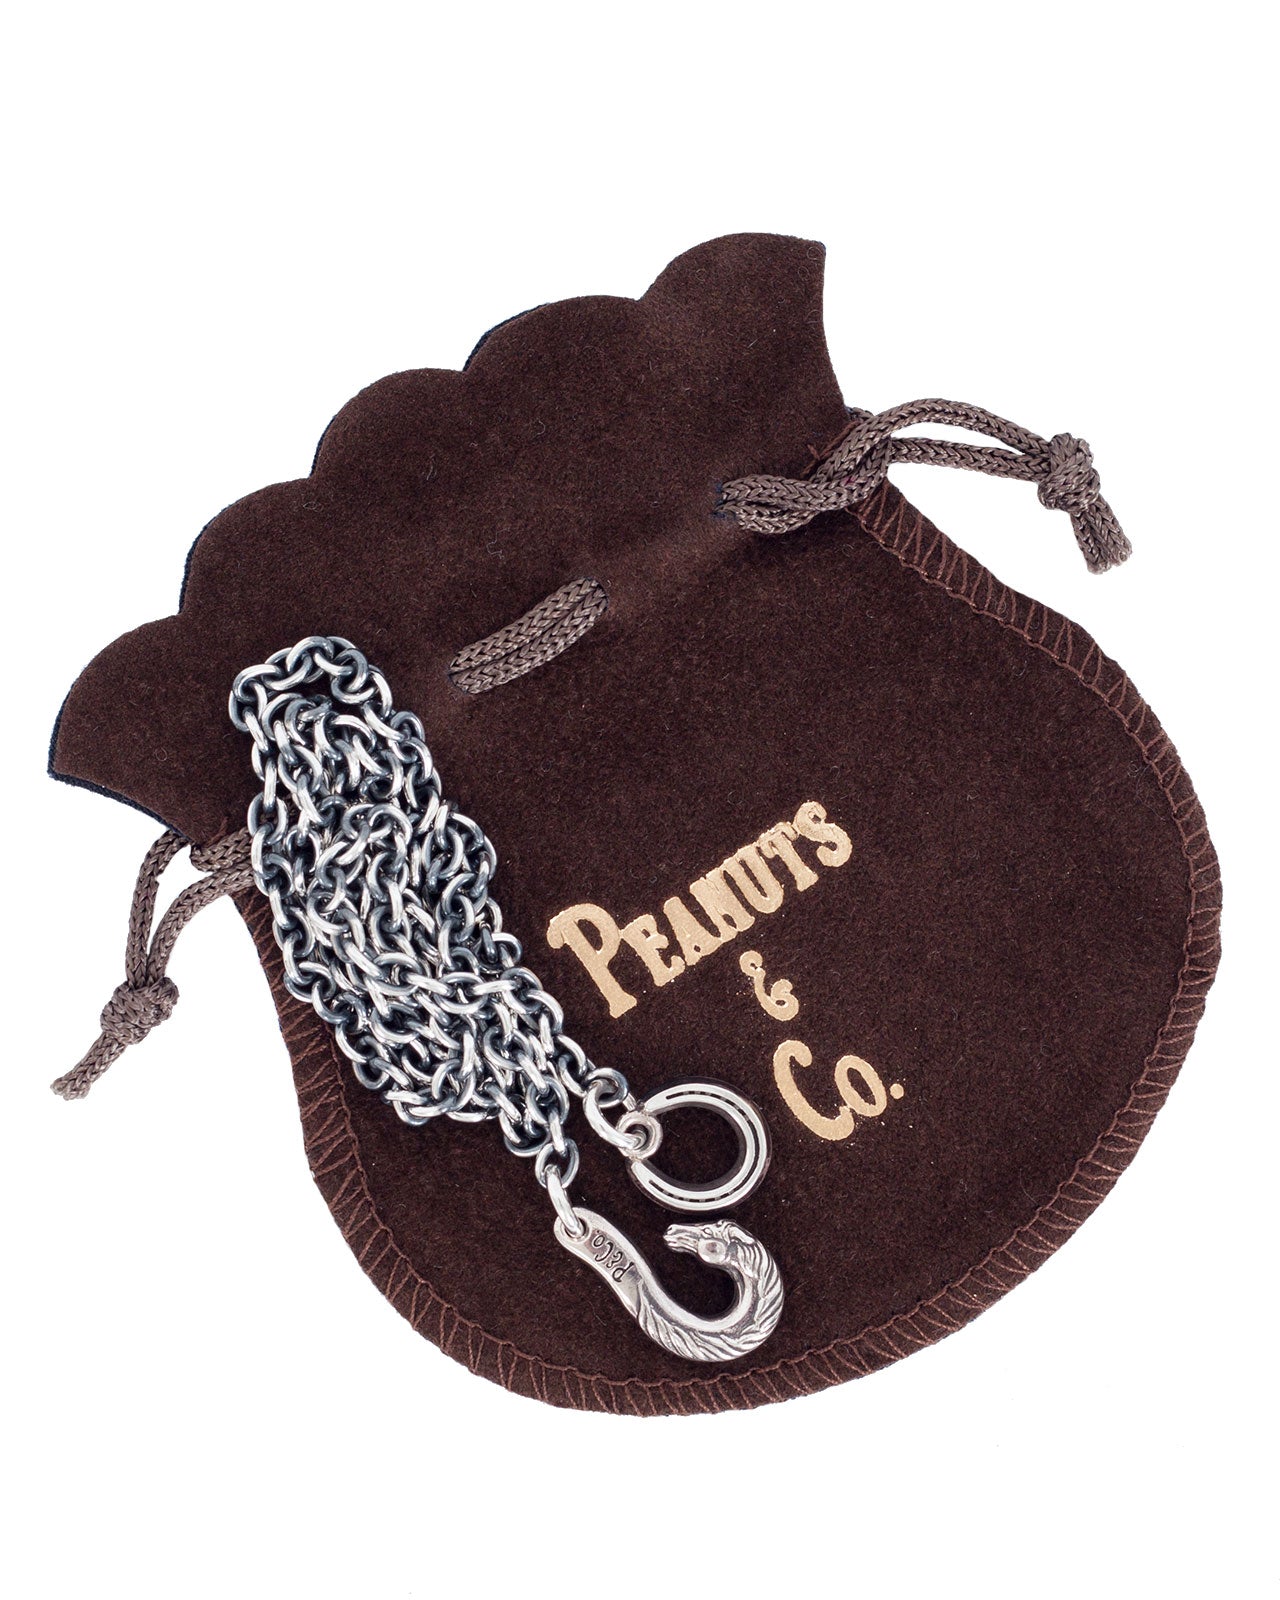 Peanuts & Co Horse Wallet Chain